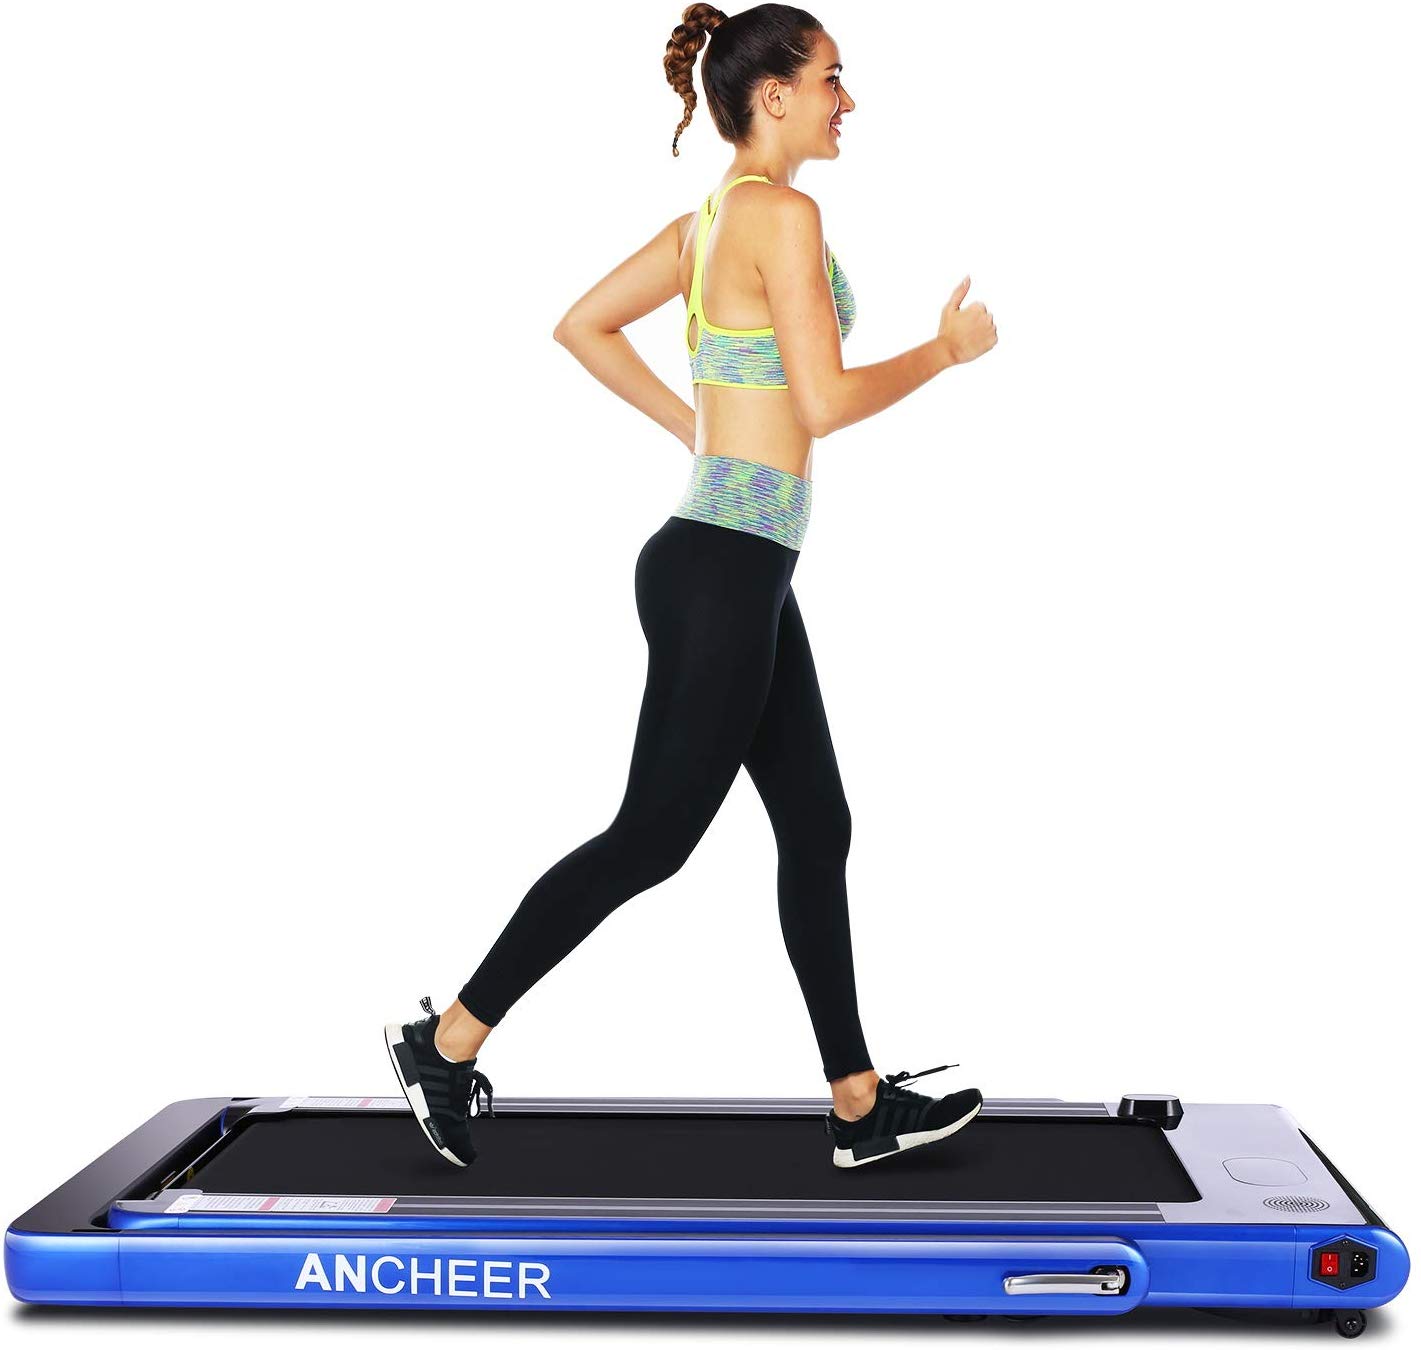 Ancheer 2 in 1 Under Desk Treadmill Review